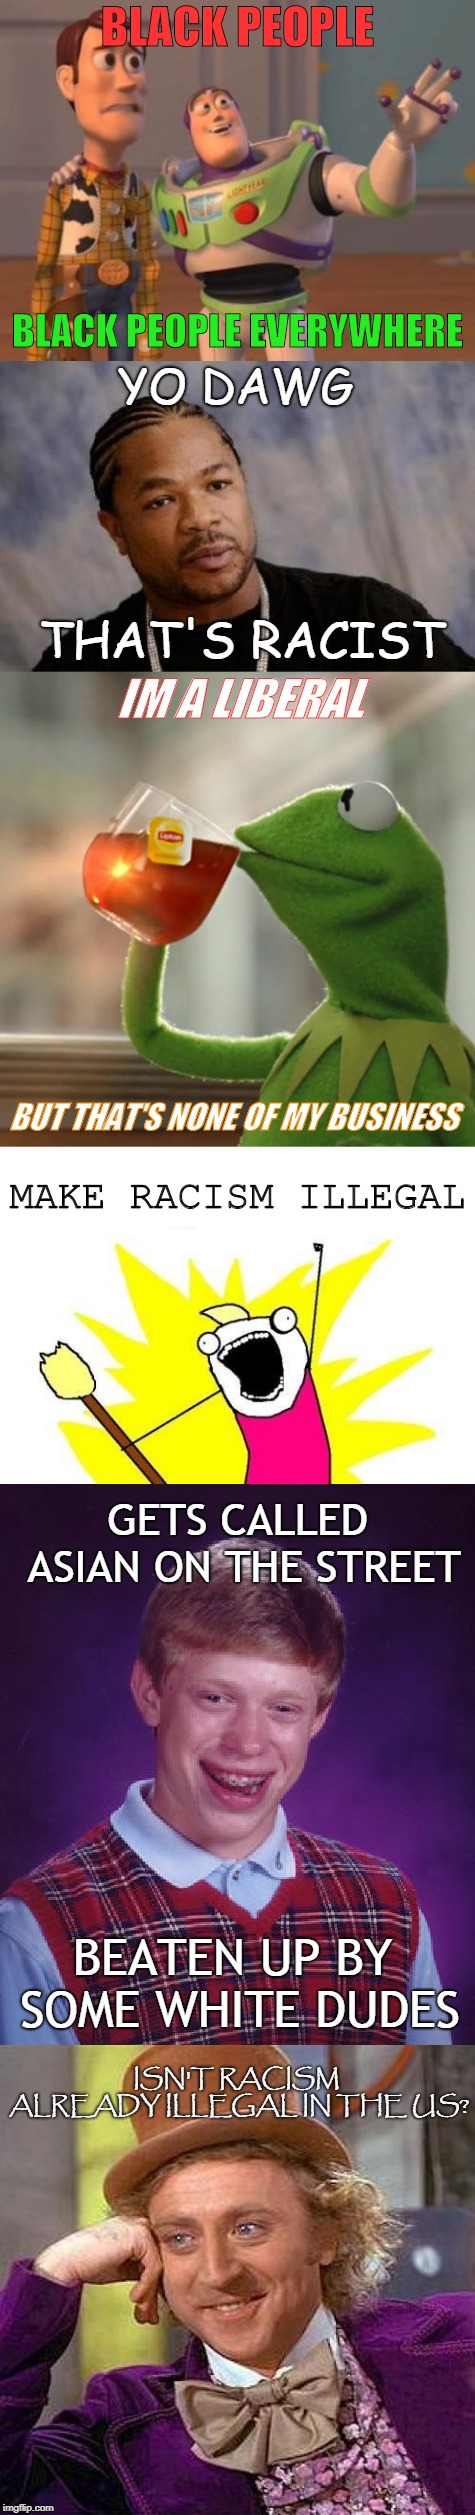 youre racist but thats none of my business